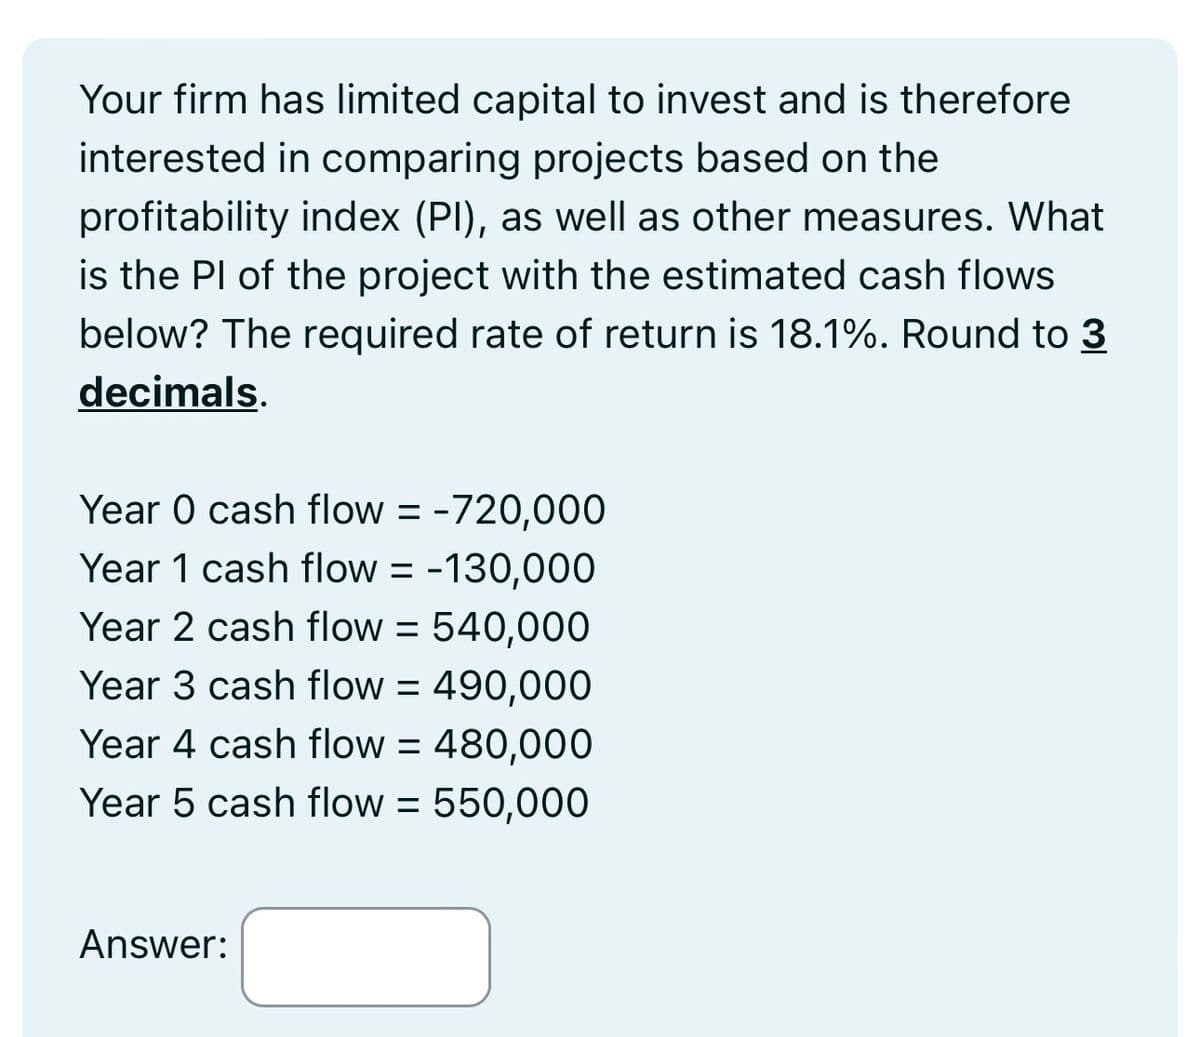 Your firm has limited capital to invest and is therefore
interested in comparing projects based on the
profitability index (PI), as well as other measures. What
is the PI of the project with the estimated cash flows
below? The required rate of return is 18.1%. Round to 3
decimals.
Year 0 cash flow = 720,000
Year 1 cash flow = -130,000
Year 2 cash flow = 540,000
Year 3 cash flow = 490,000
Year 4 cash flow = 480,000
Year 5 cash flow = 550,000
Answer: